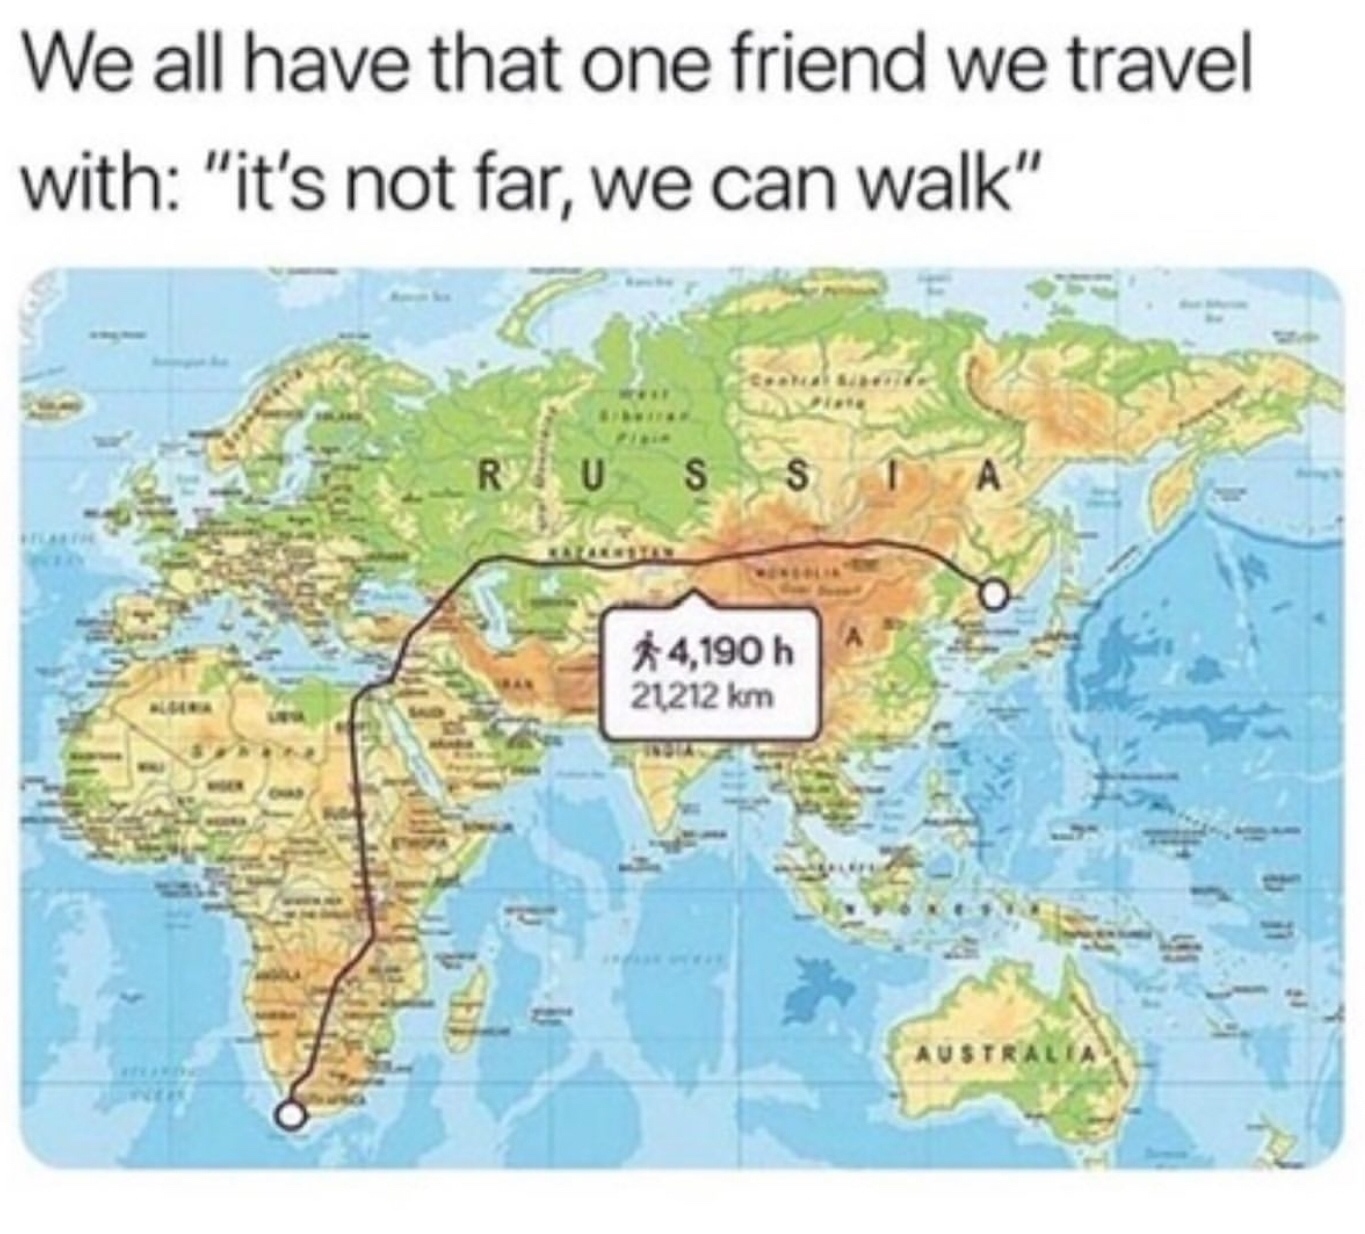 we all have that one friend we travel with - We all have that one friend we travel with "it's not far, we can walk" $4,190 h 21212 km 11